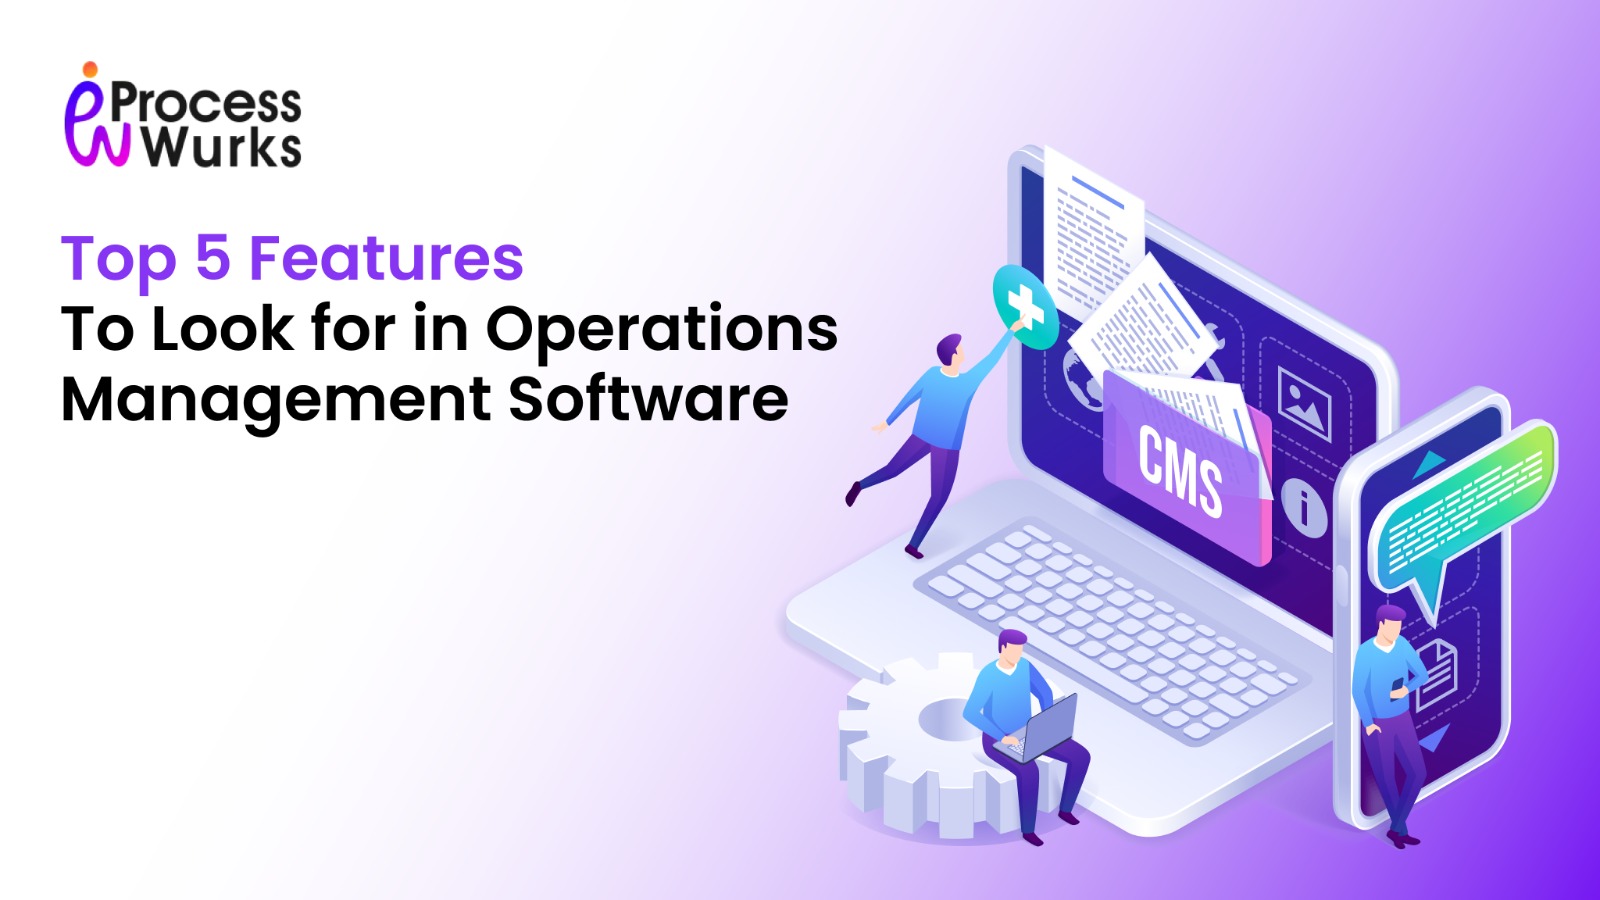 Top 5 Features to Look for in Operations Management Software